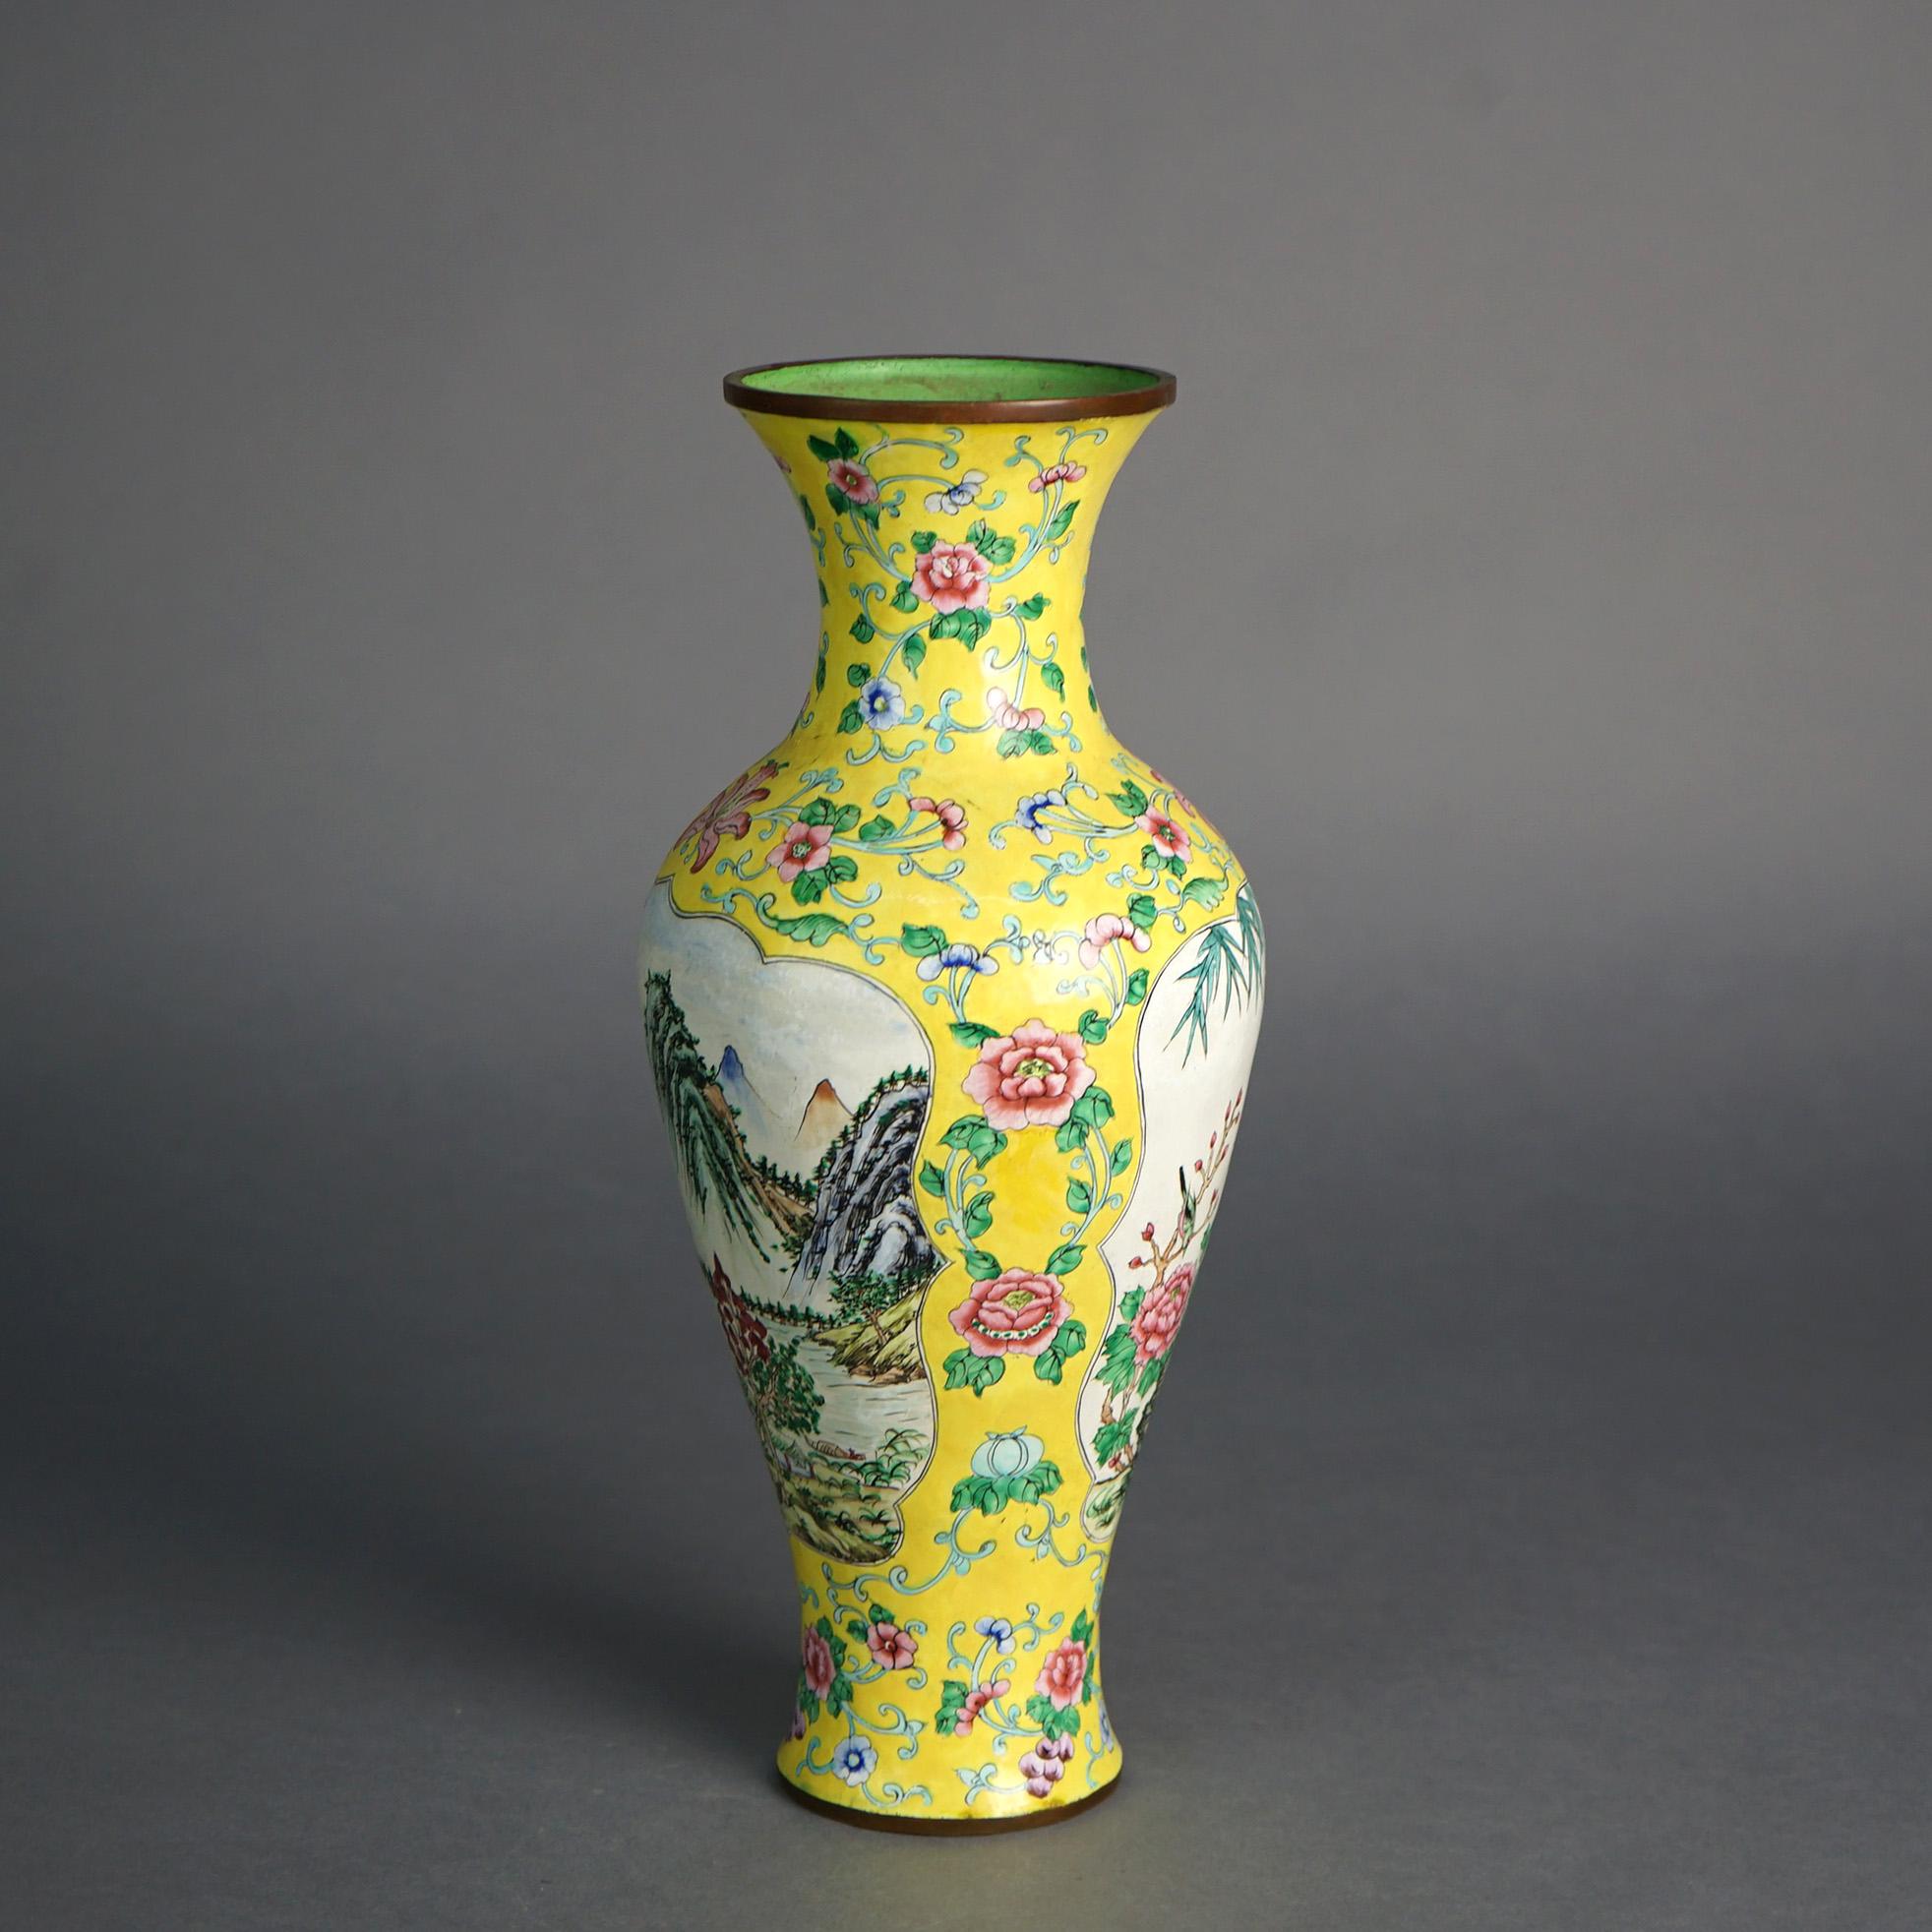 20th Century Antique Chinese Enameled Vase with Landscape & Flowers C1930 For Sale